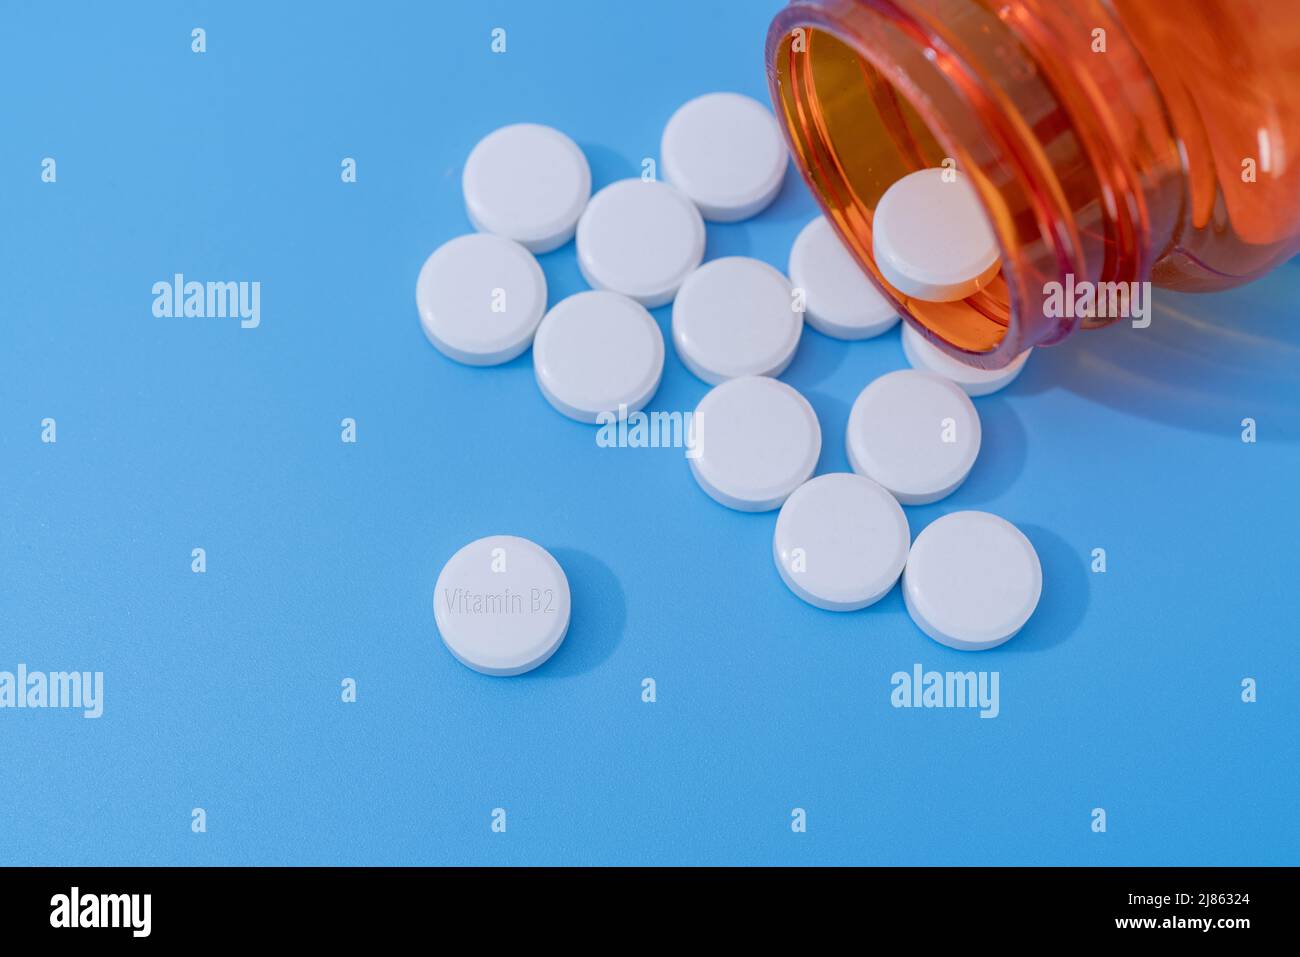 Vitamin b2 pills hi-res stock photography and images - Alamy